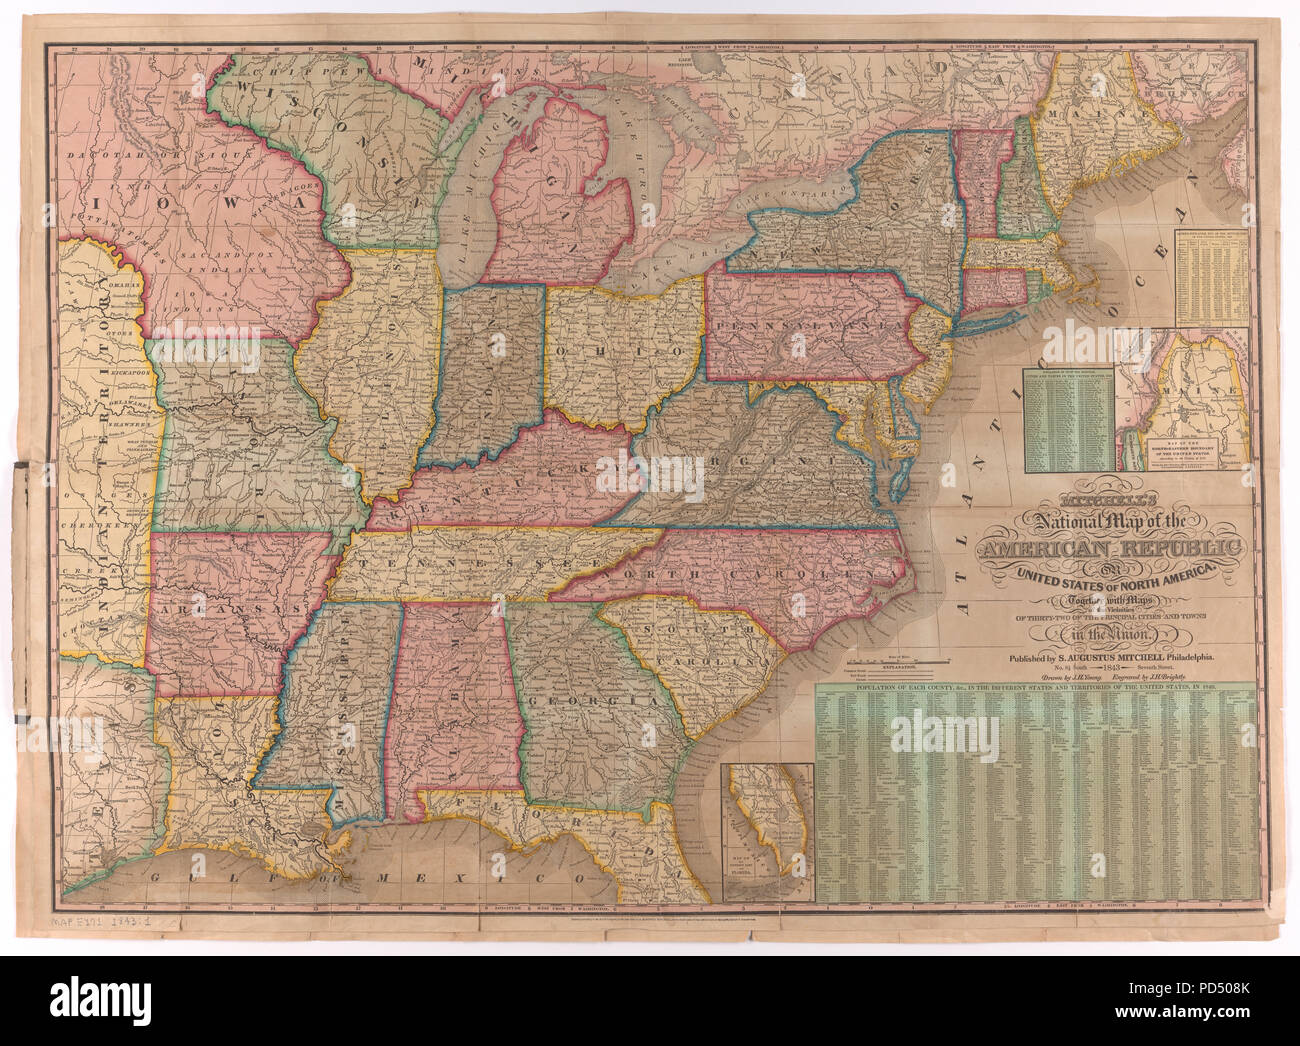 National Map of the American Republic, 1843 Stock Photo